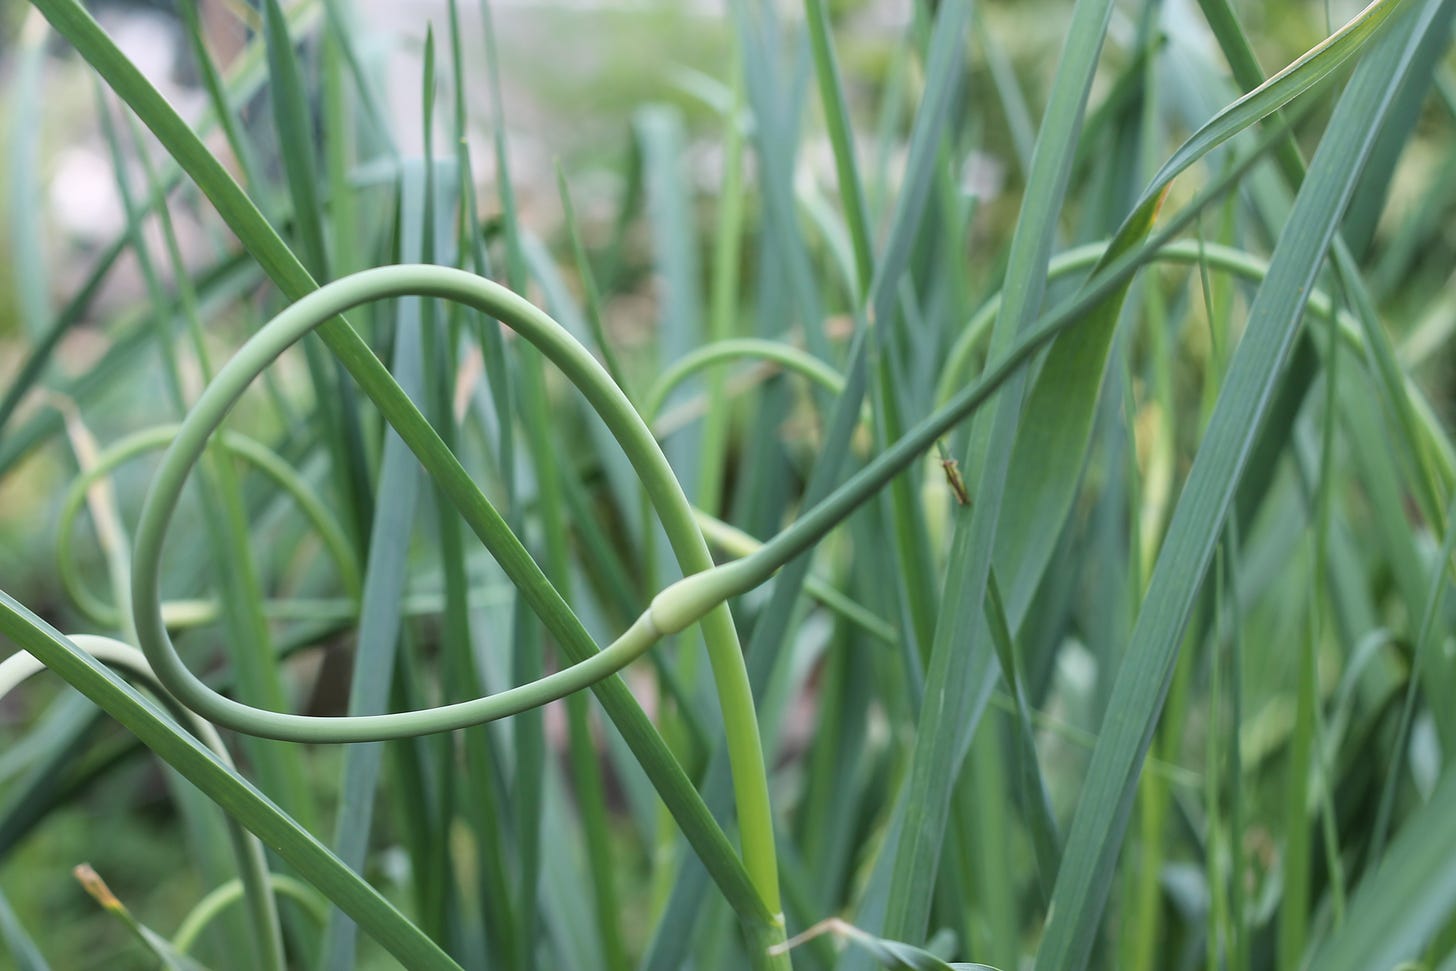 The loop of the garlic flower stem (scape). 